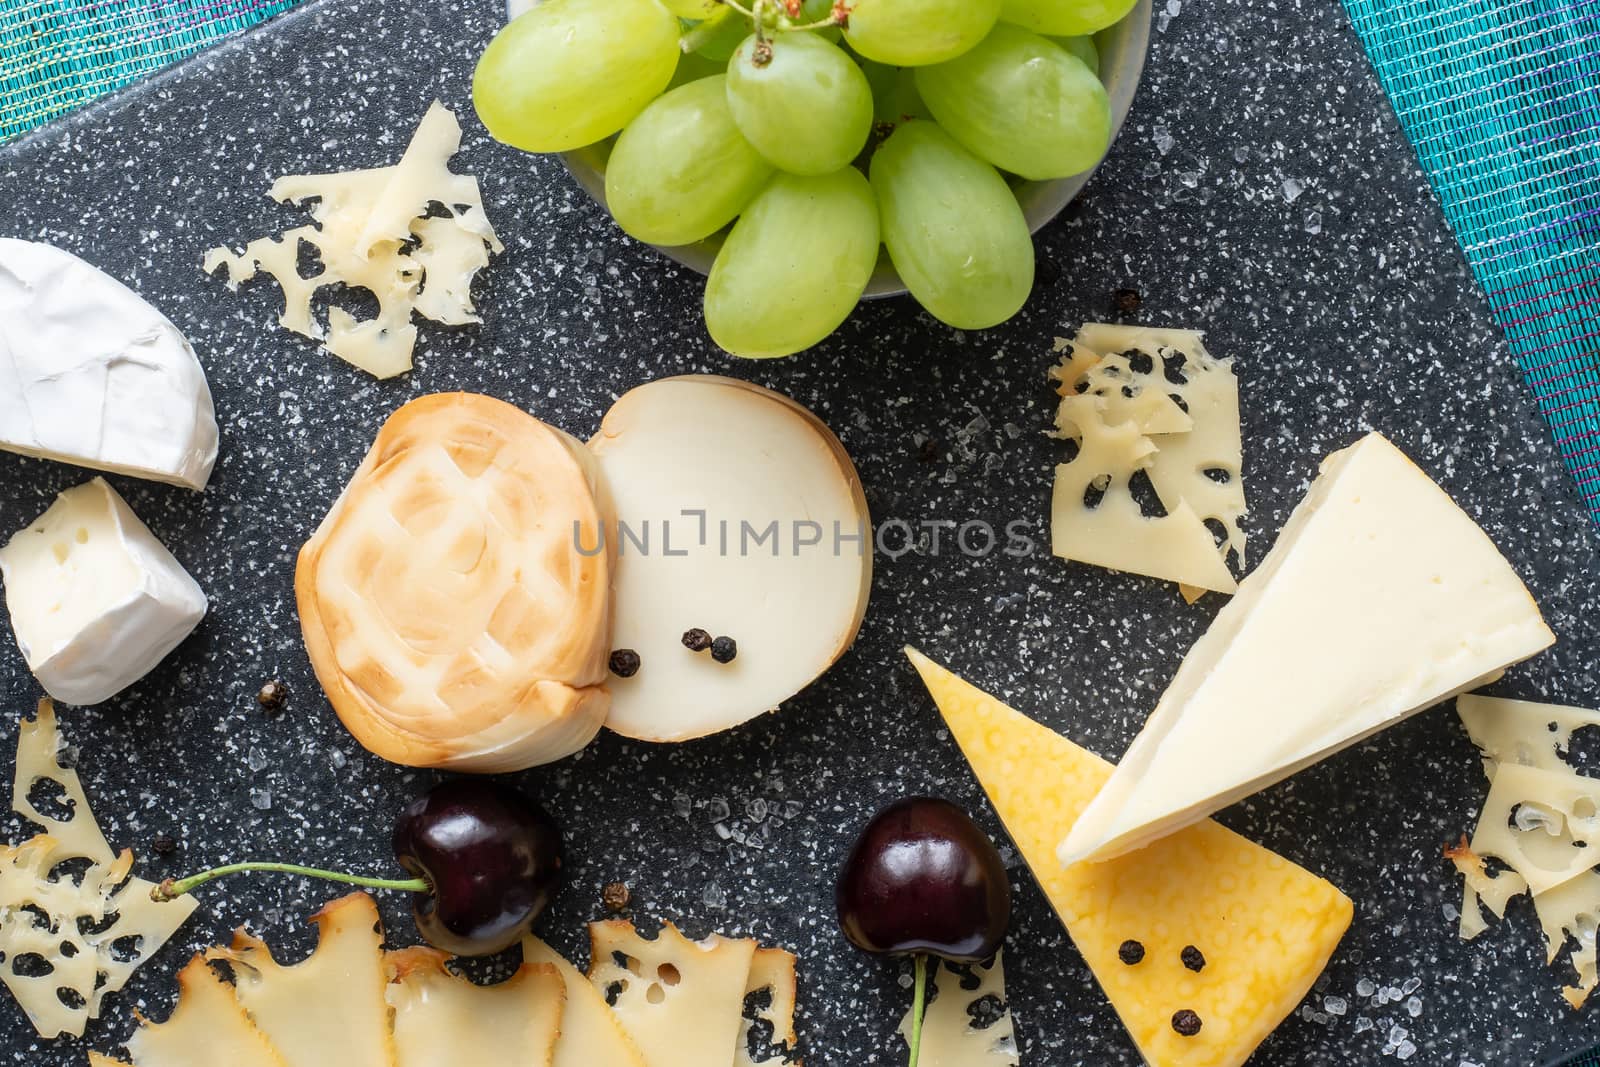 Cold appetizer. Cold cuts. Cheese on cutting board isolated on blue background, top view